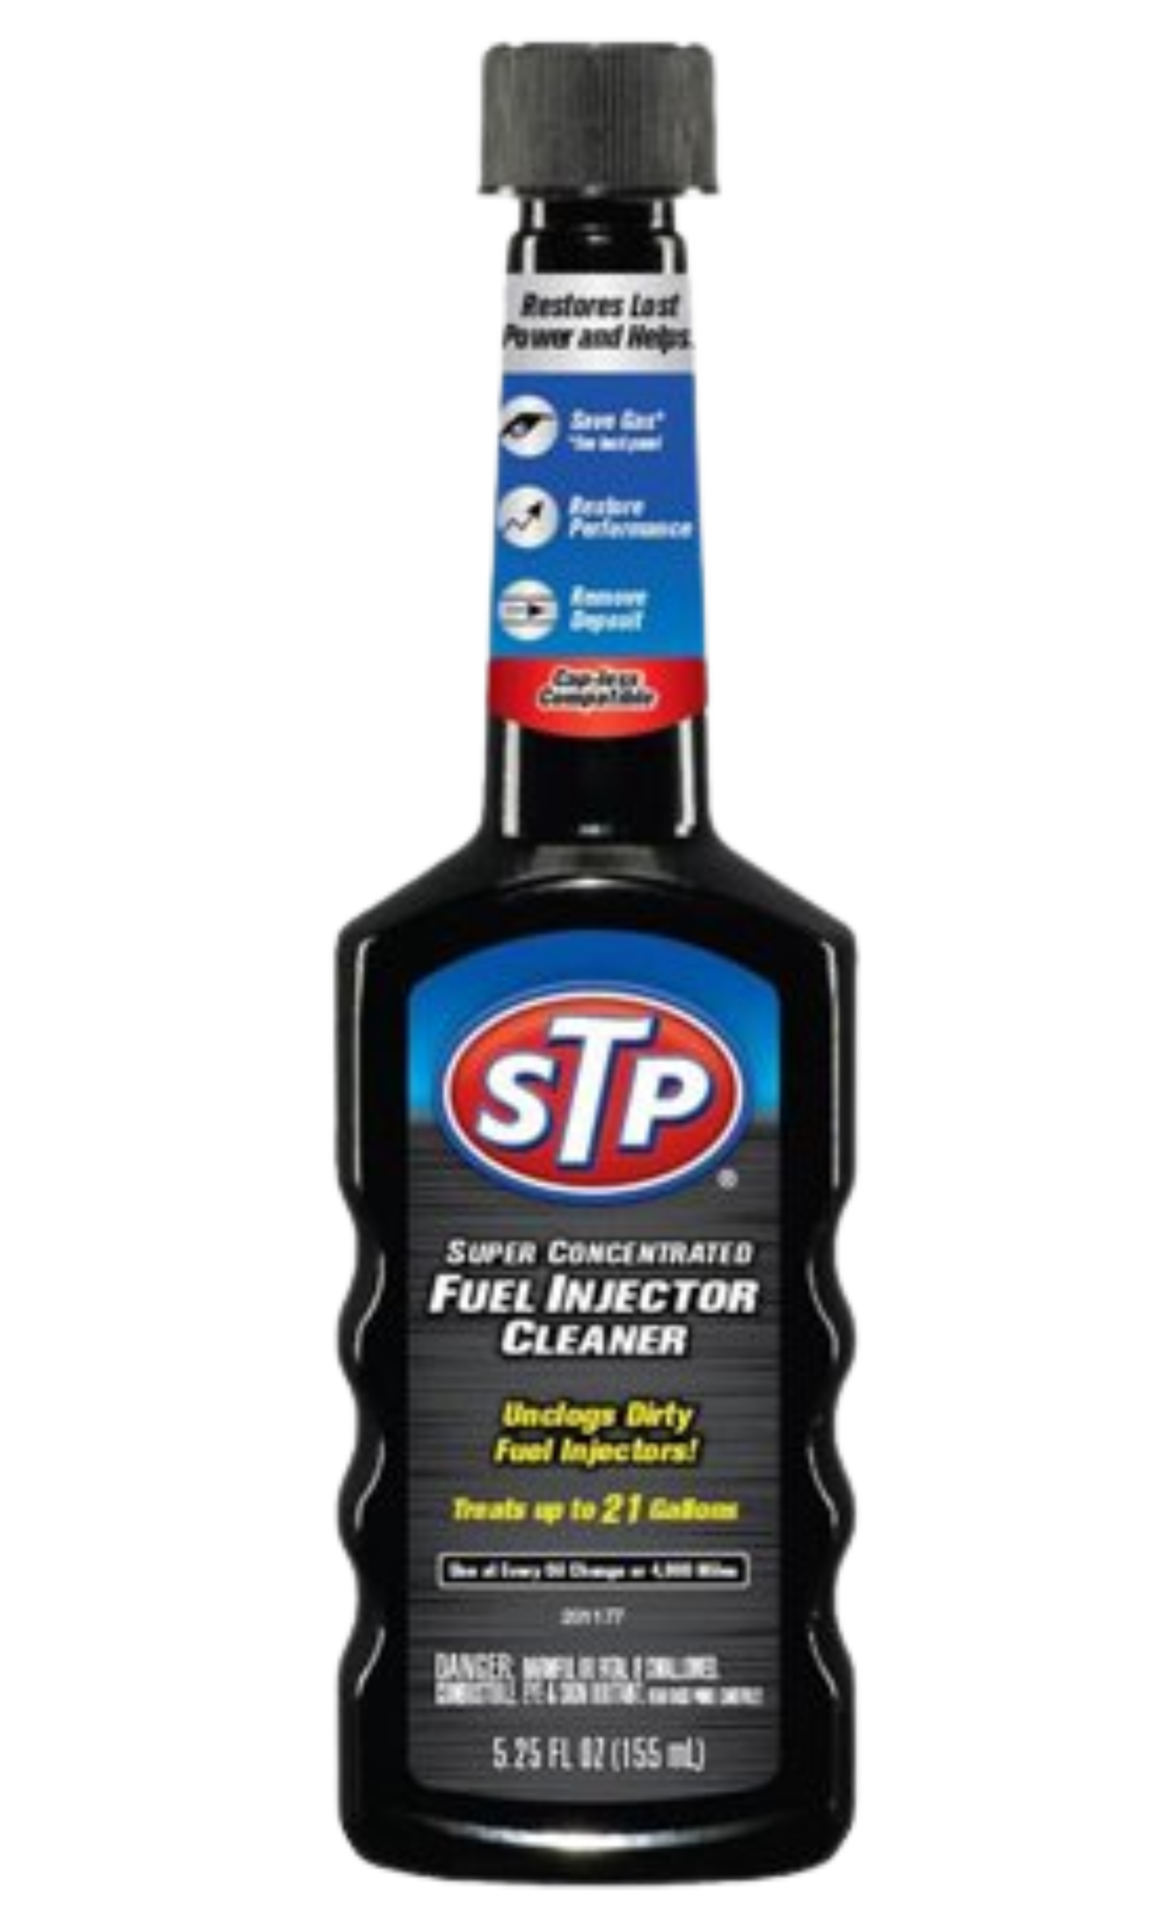 STP Super Concentrated Fuel Injector Cleaner 12/5.25 oz. 